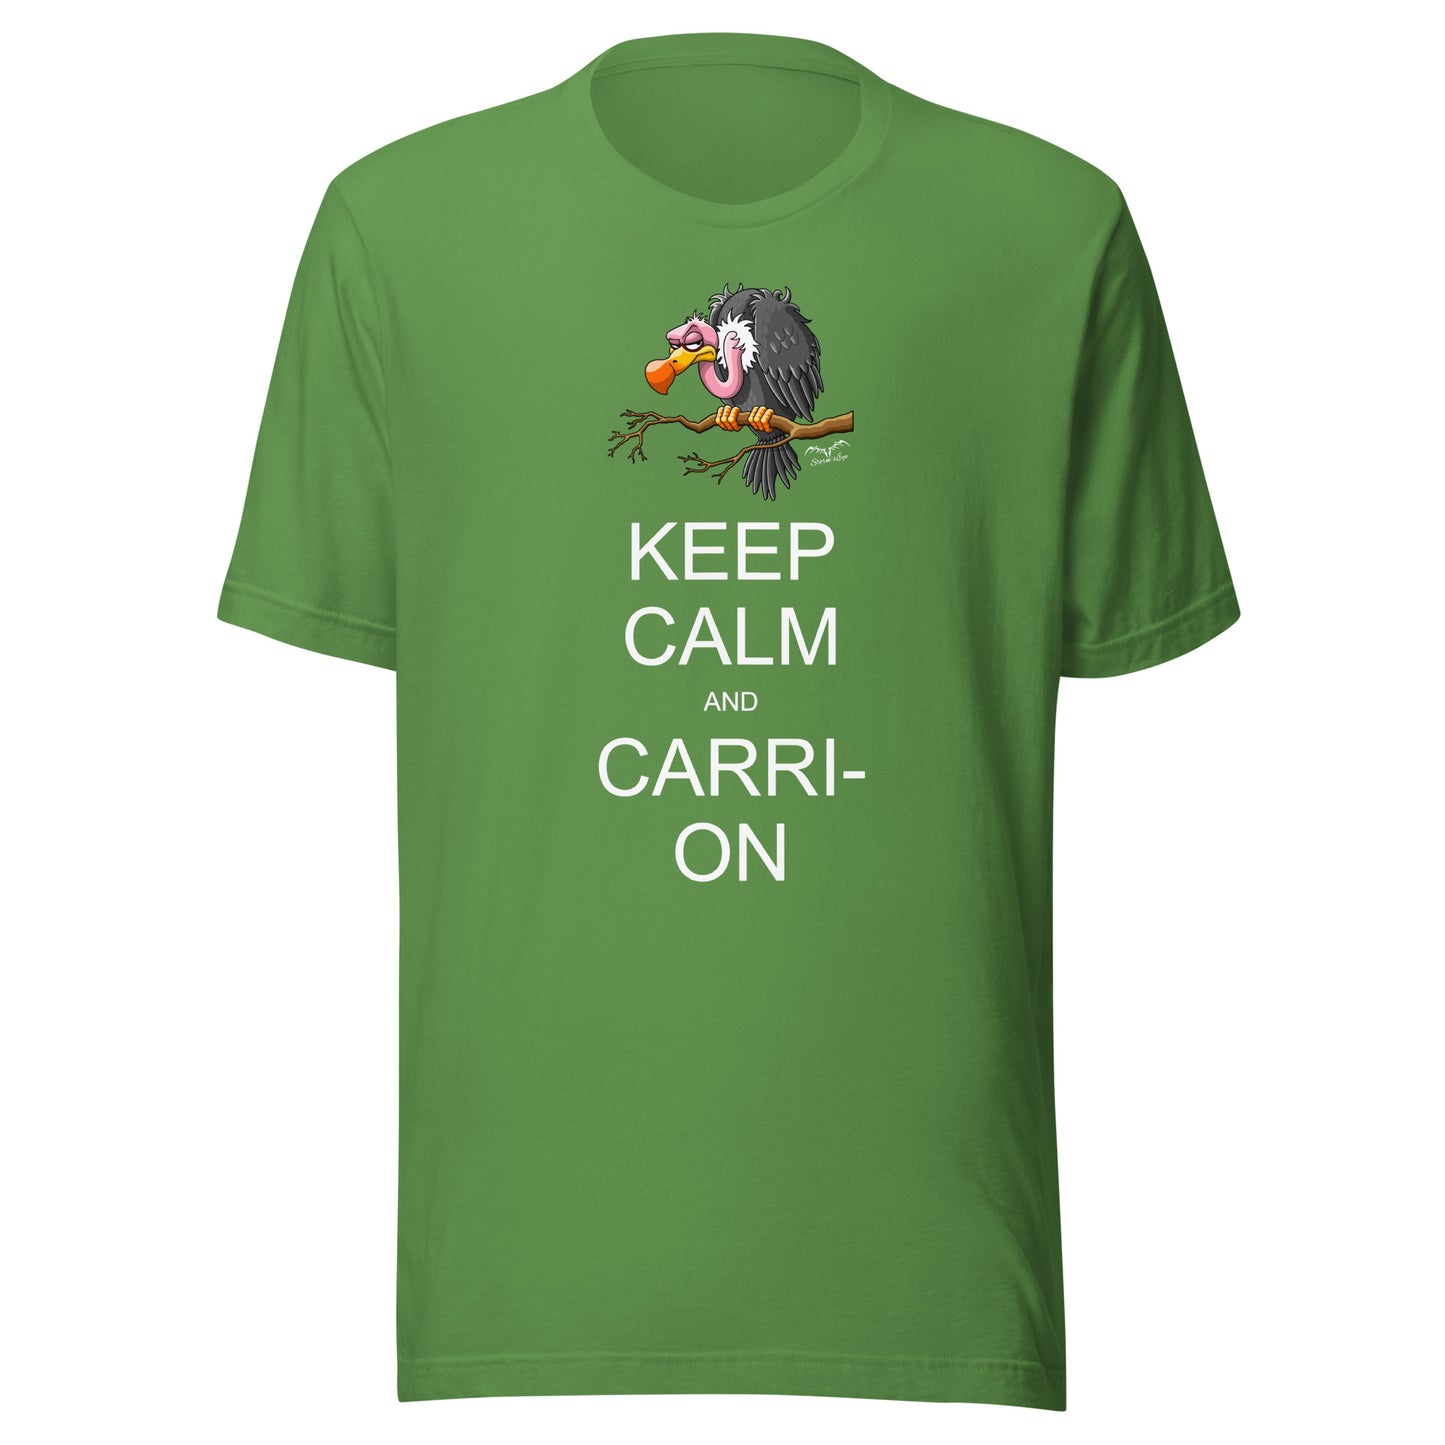 keep calm and carrion vulture t-shirt bright green by stormseye design